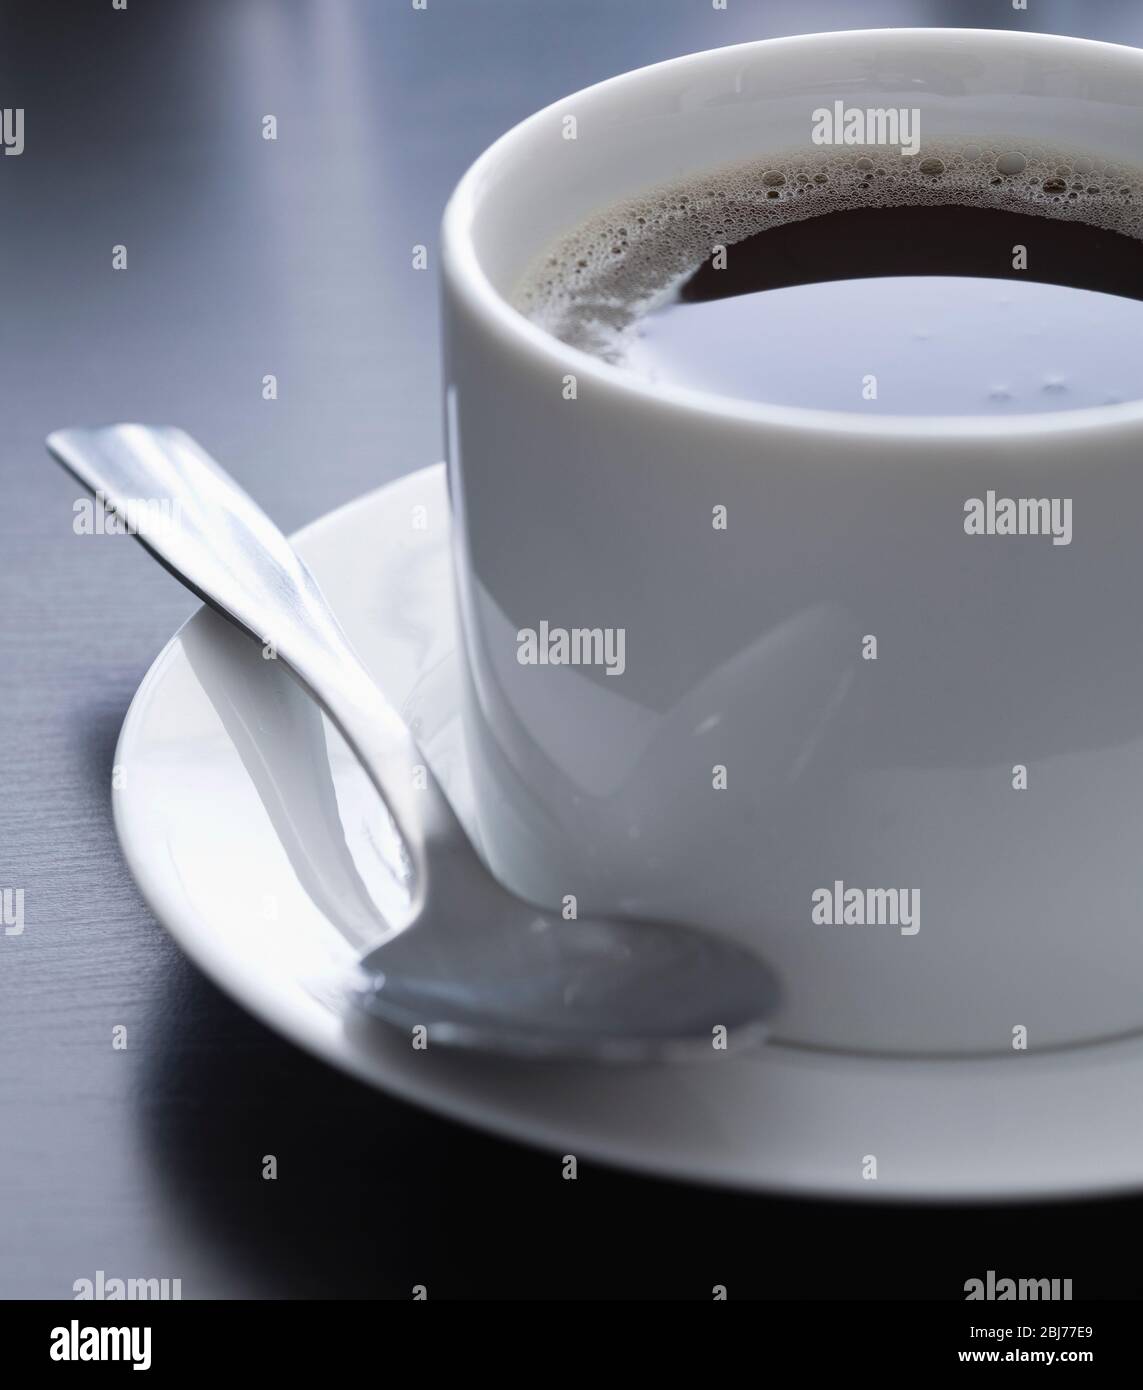 Cup of coffee on restaurant table Stock Photo